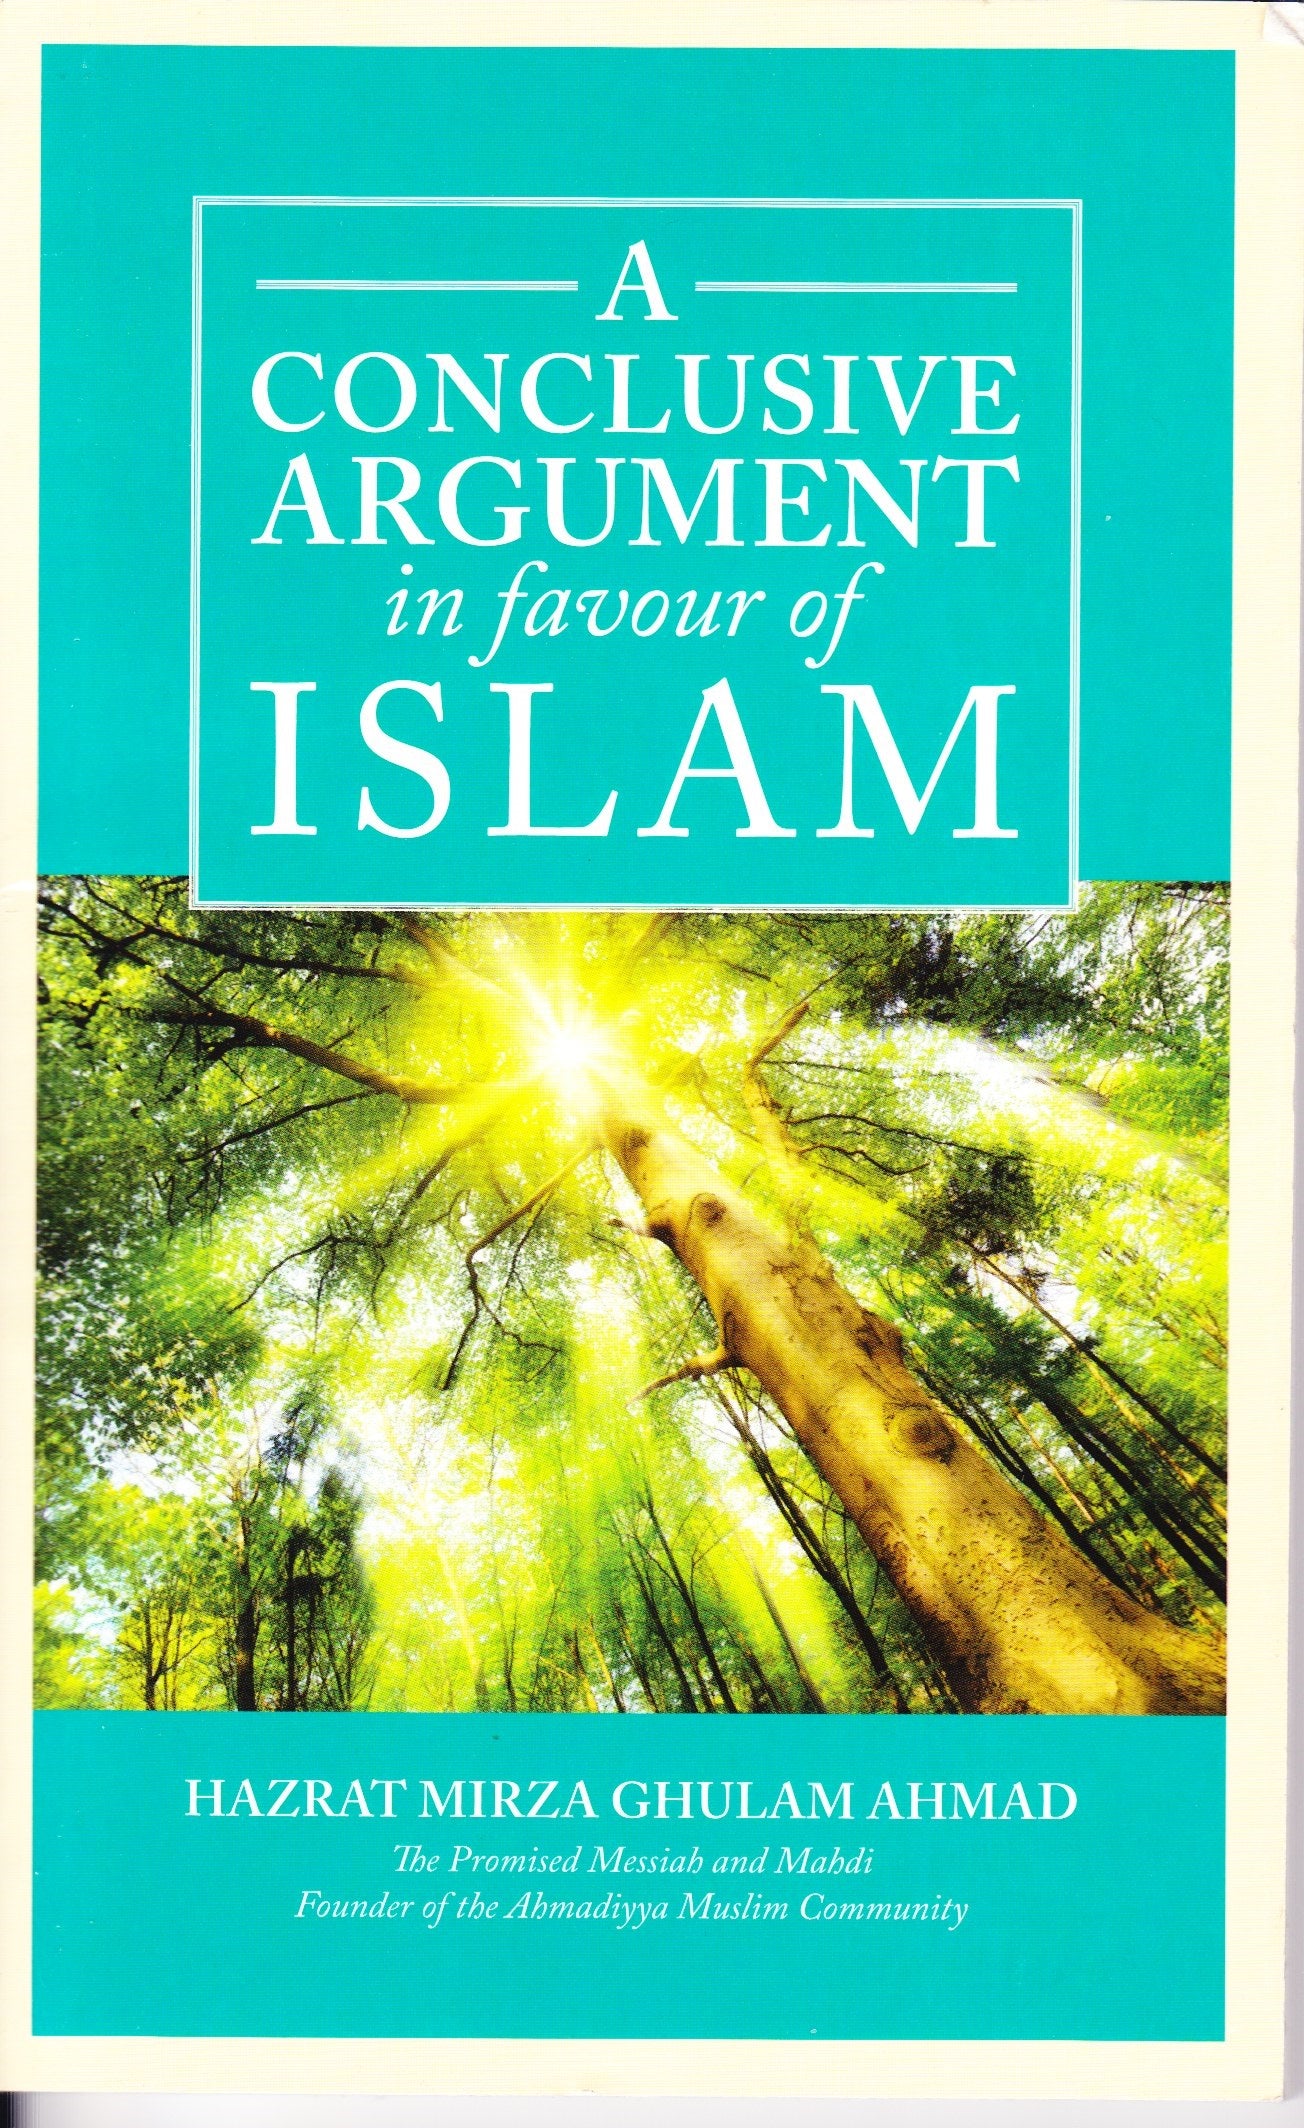 The Conclusive Argument in Favour of Islam